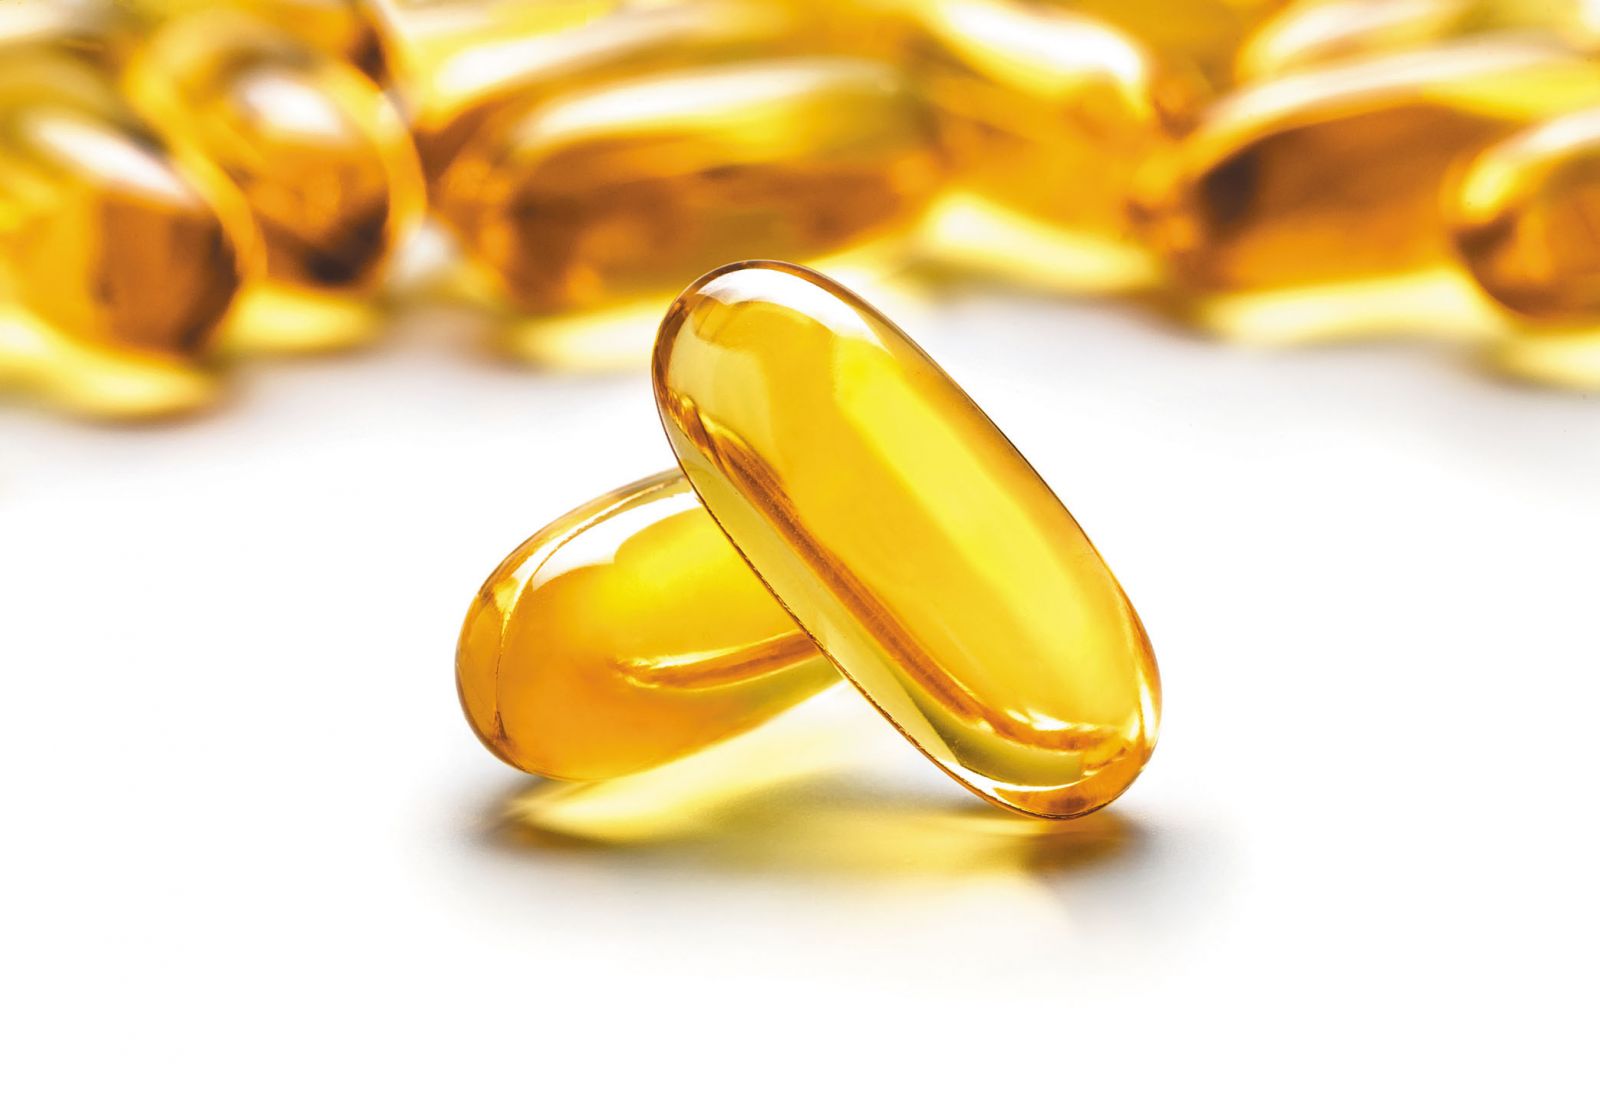 when is it best to take omega 3